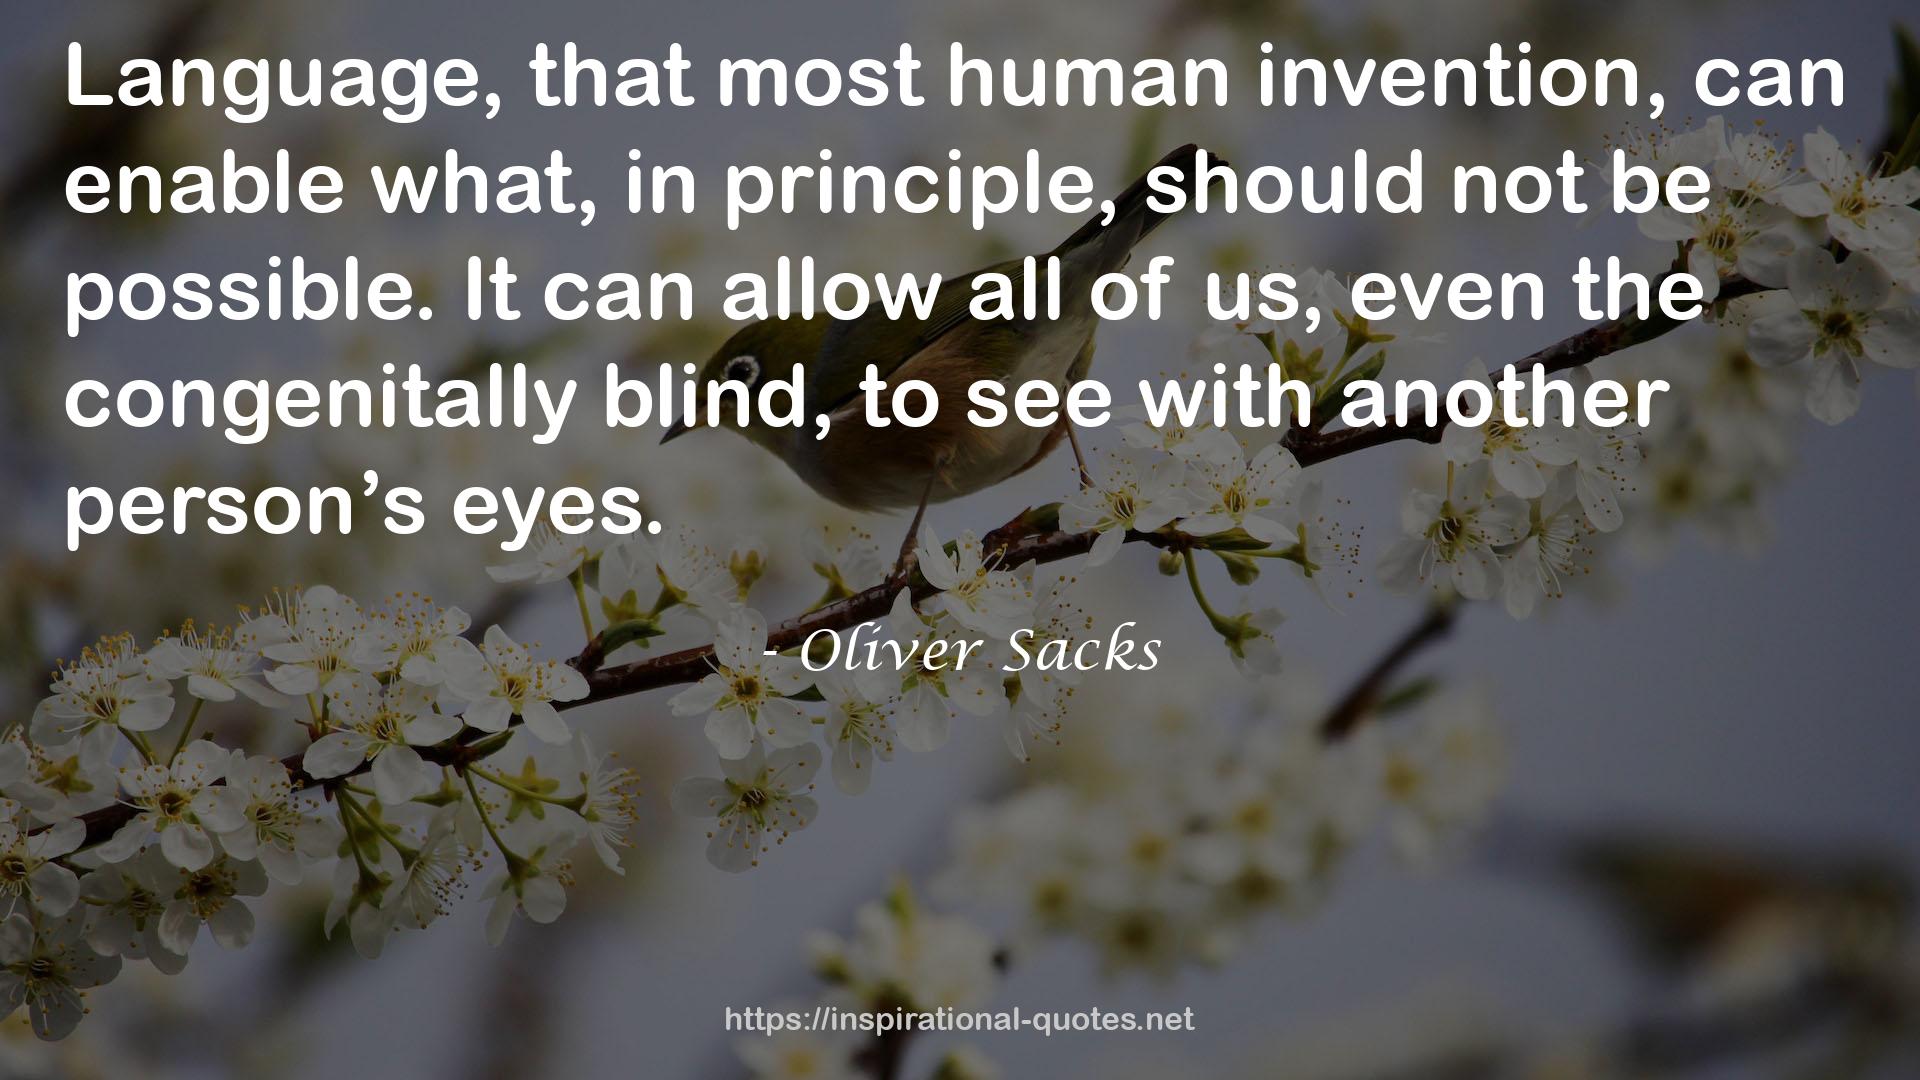 Oliver Sacks QUOTES